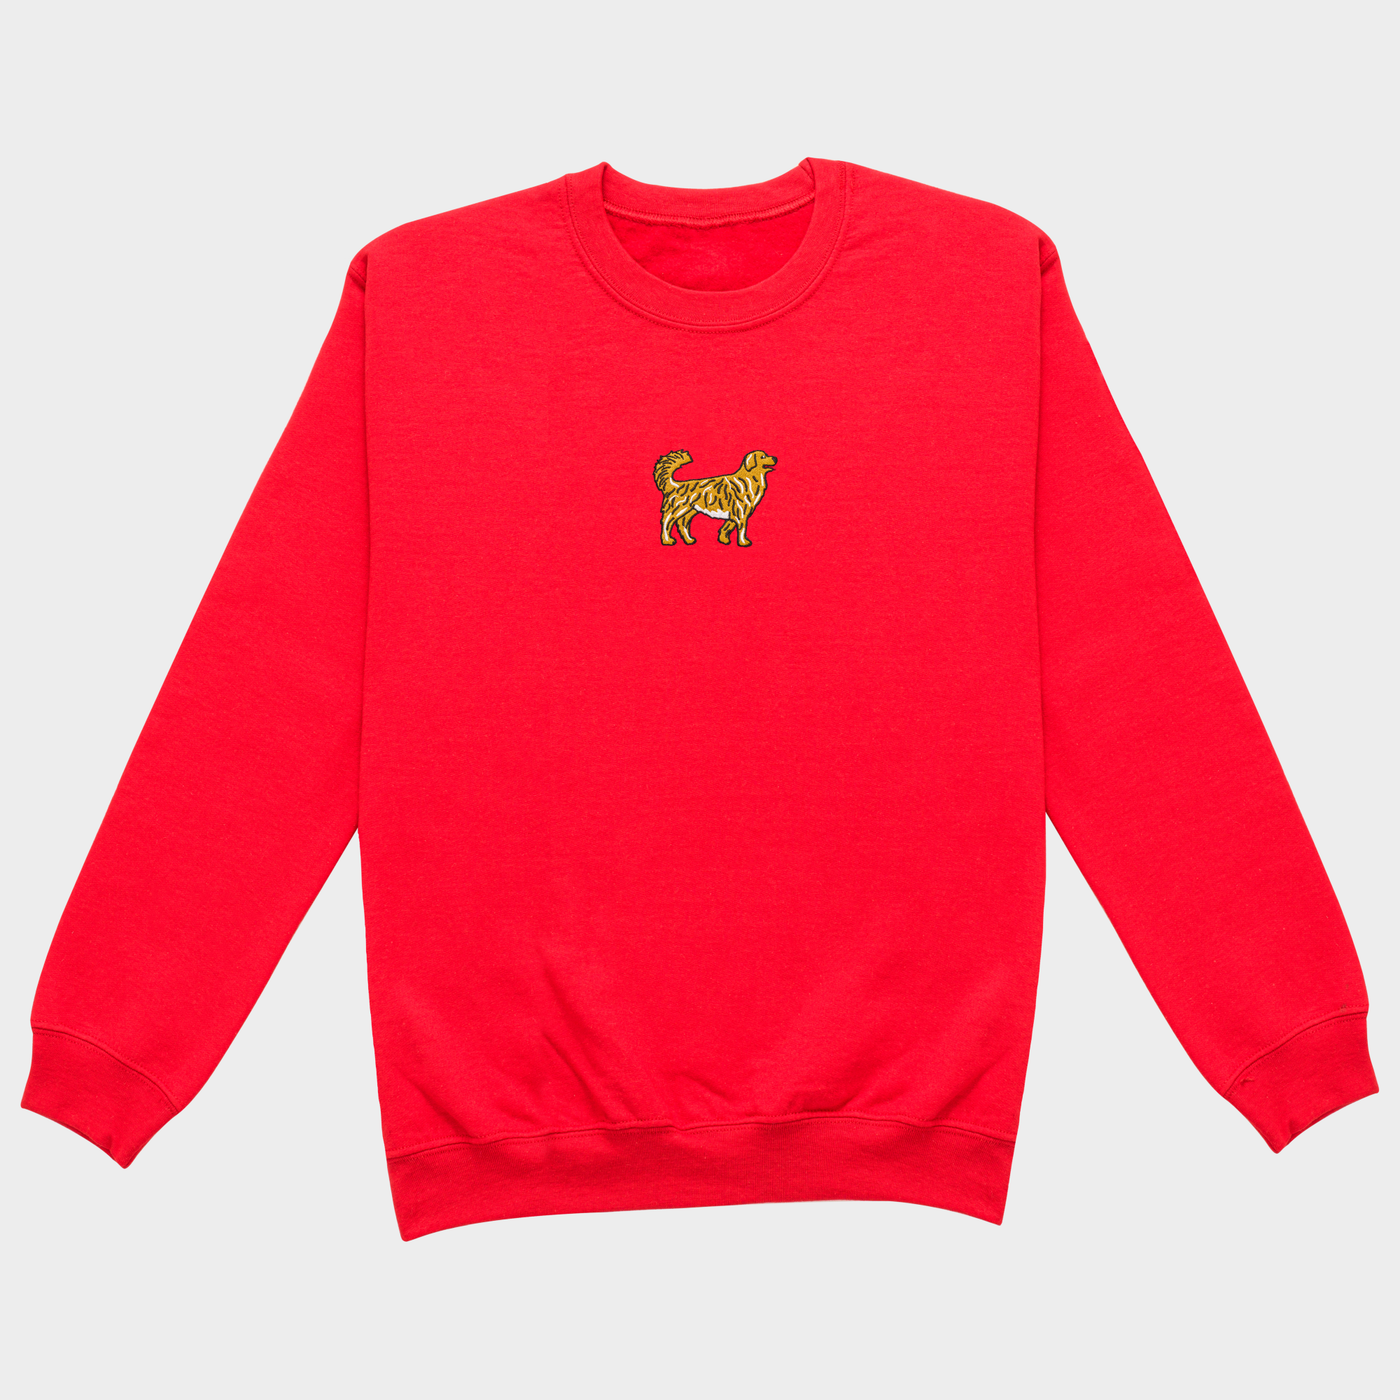 Bobby's Planet Women's Embroidered Golden Retriever Sweatshirt from Paws Dog Cat Animals Collection in Red Color#color_red